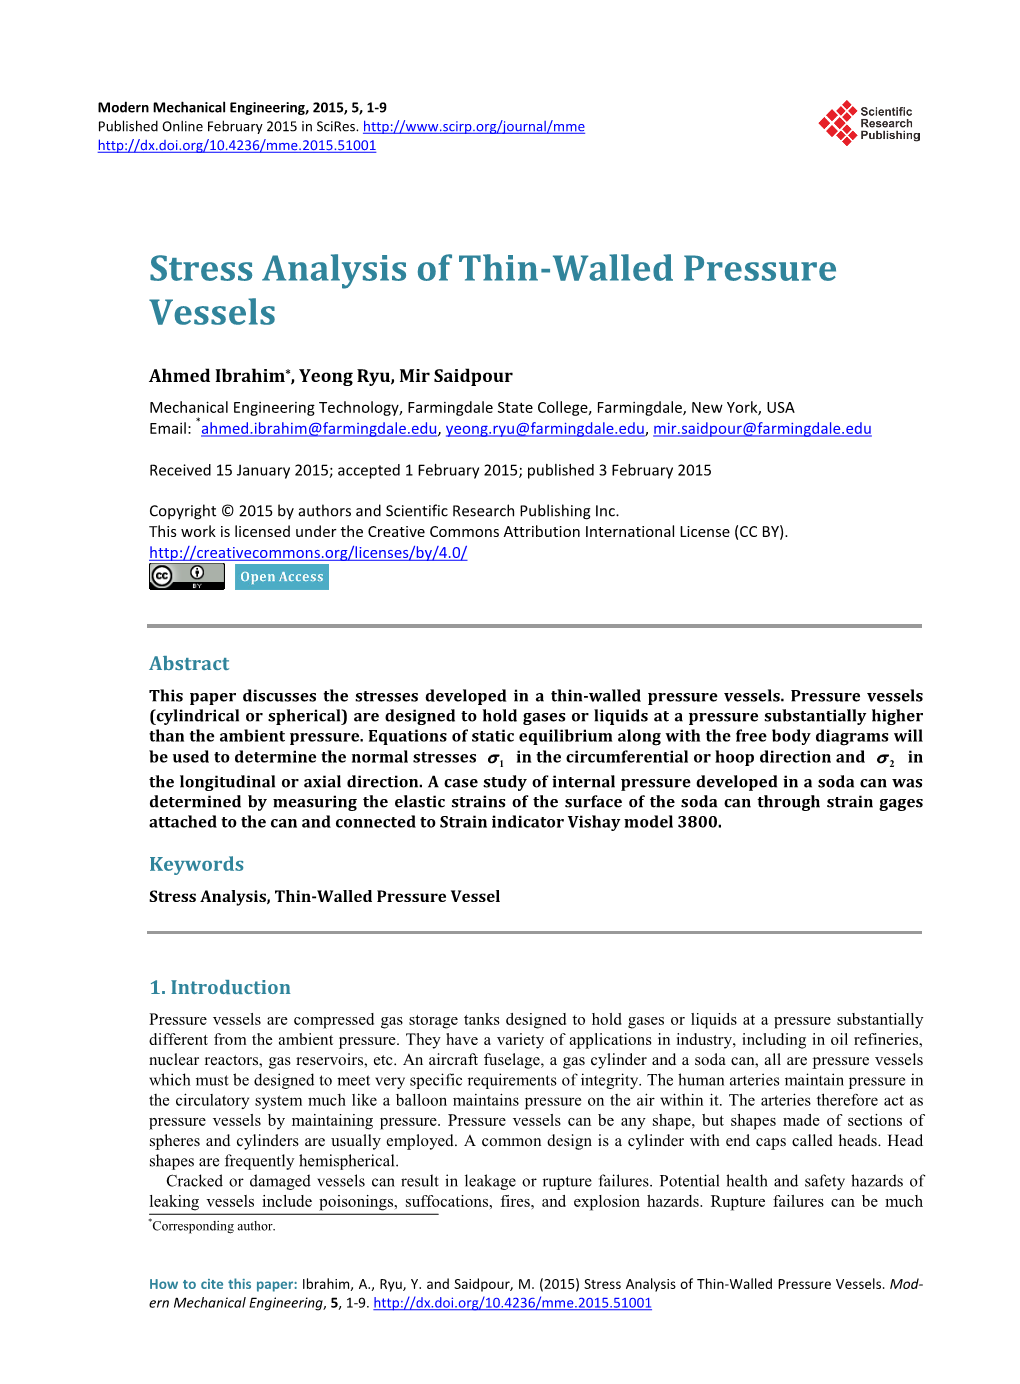 Stress Analysis of Thin-Walled Pressure Vessels